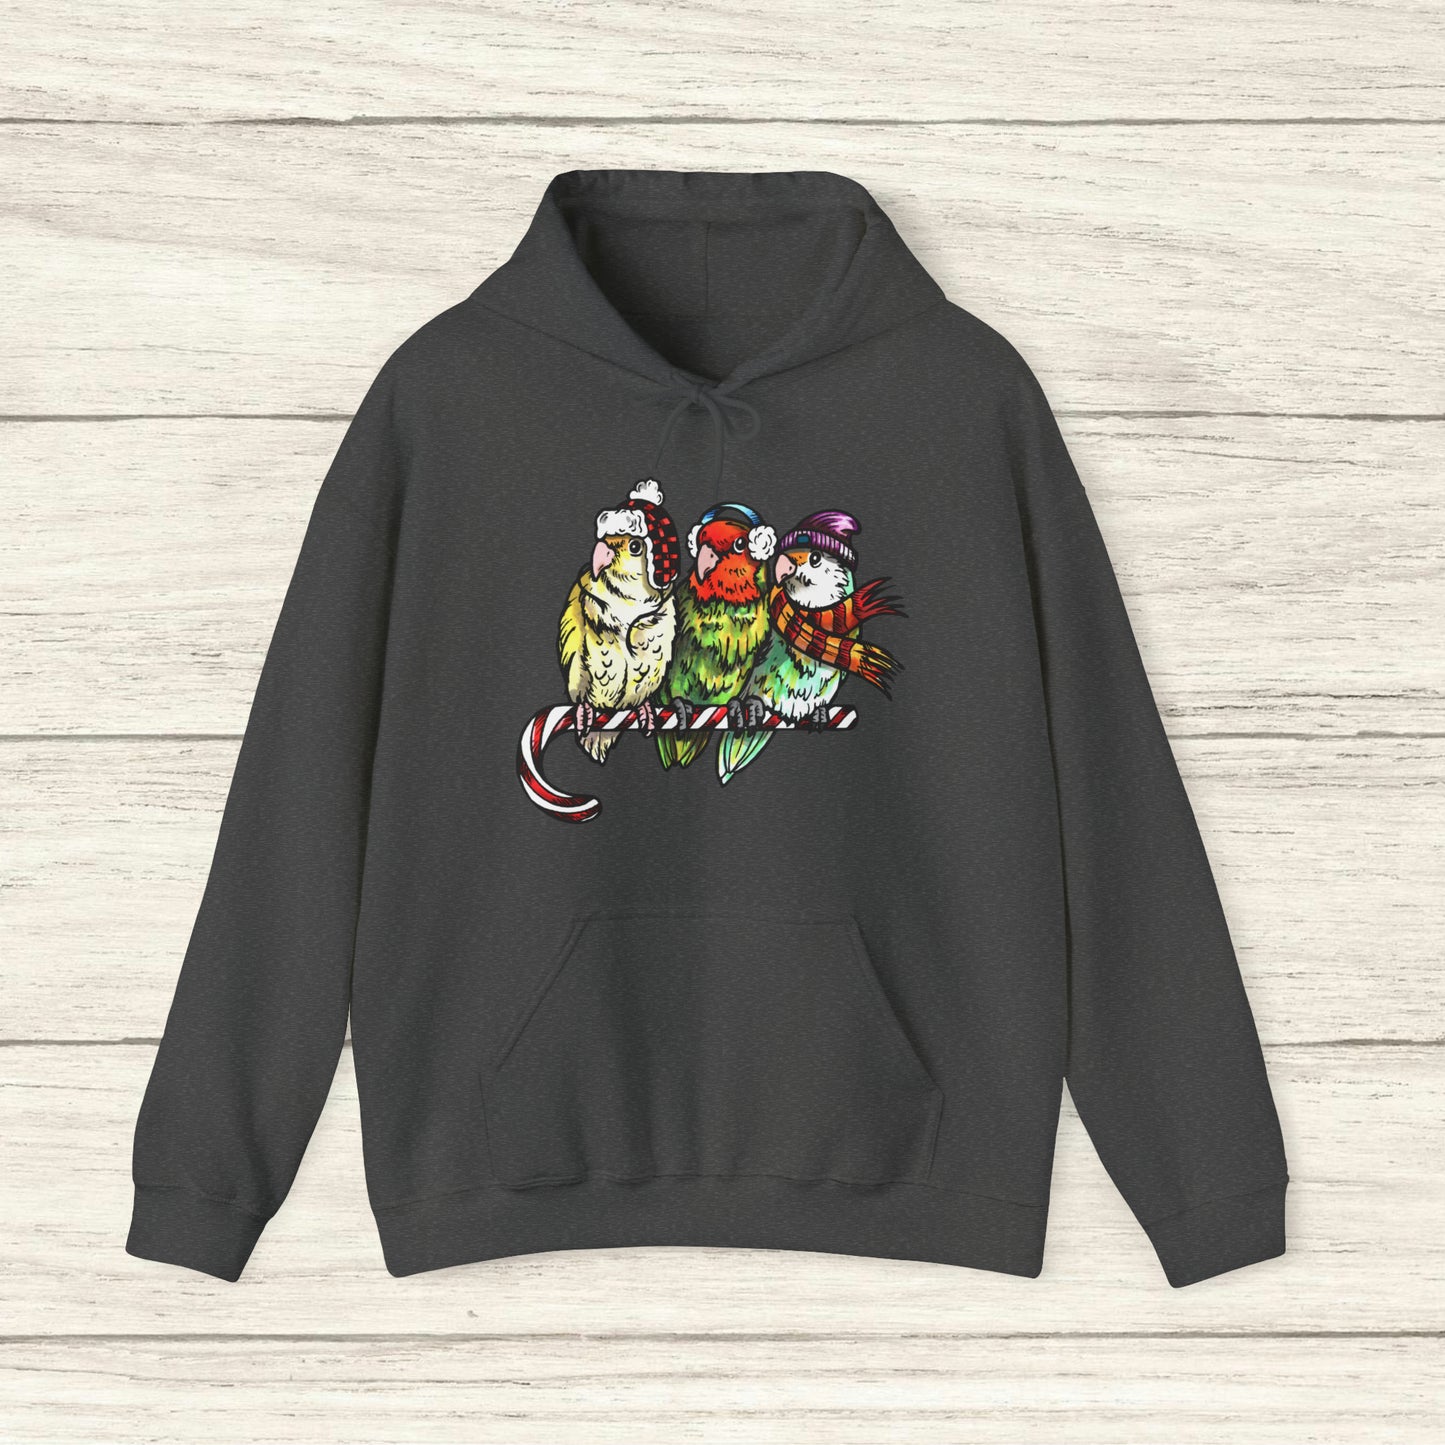 3 Lovebirds with Winter Wear & Perched on a Candy Cane, Hooded Sweatshirt